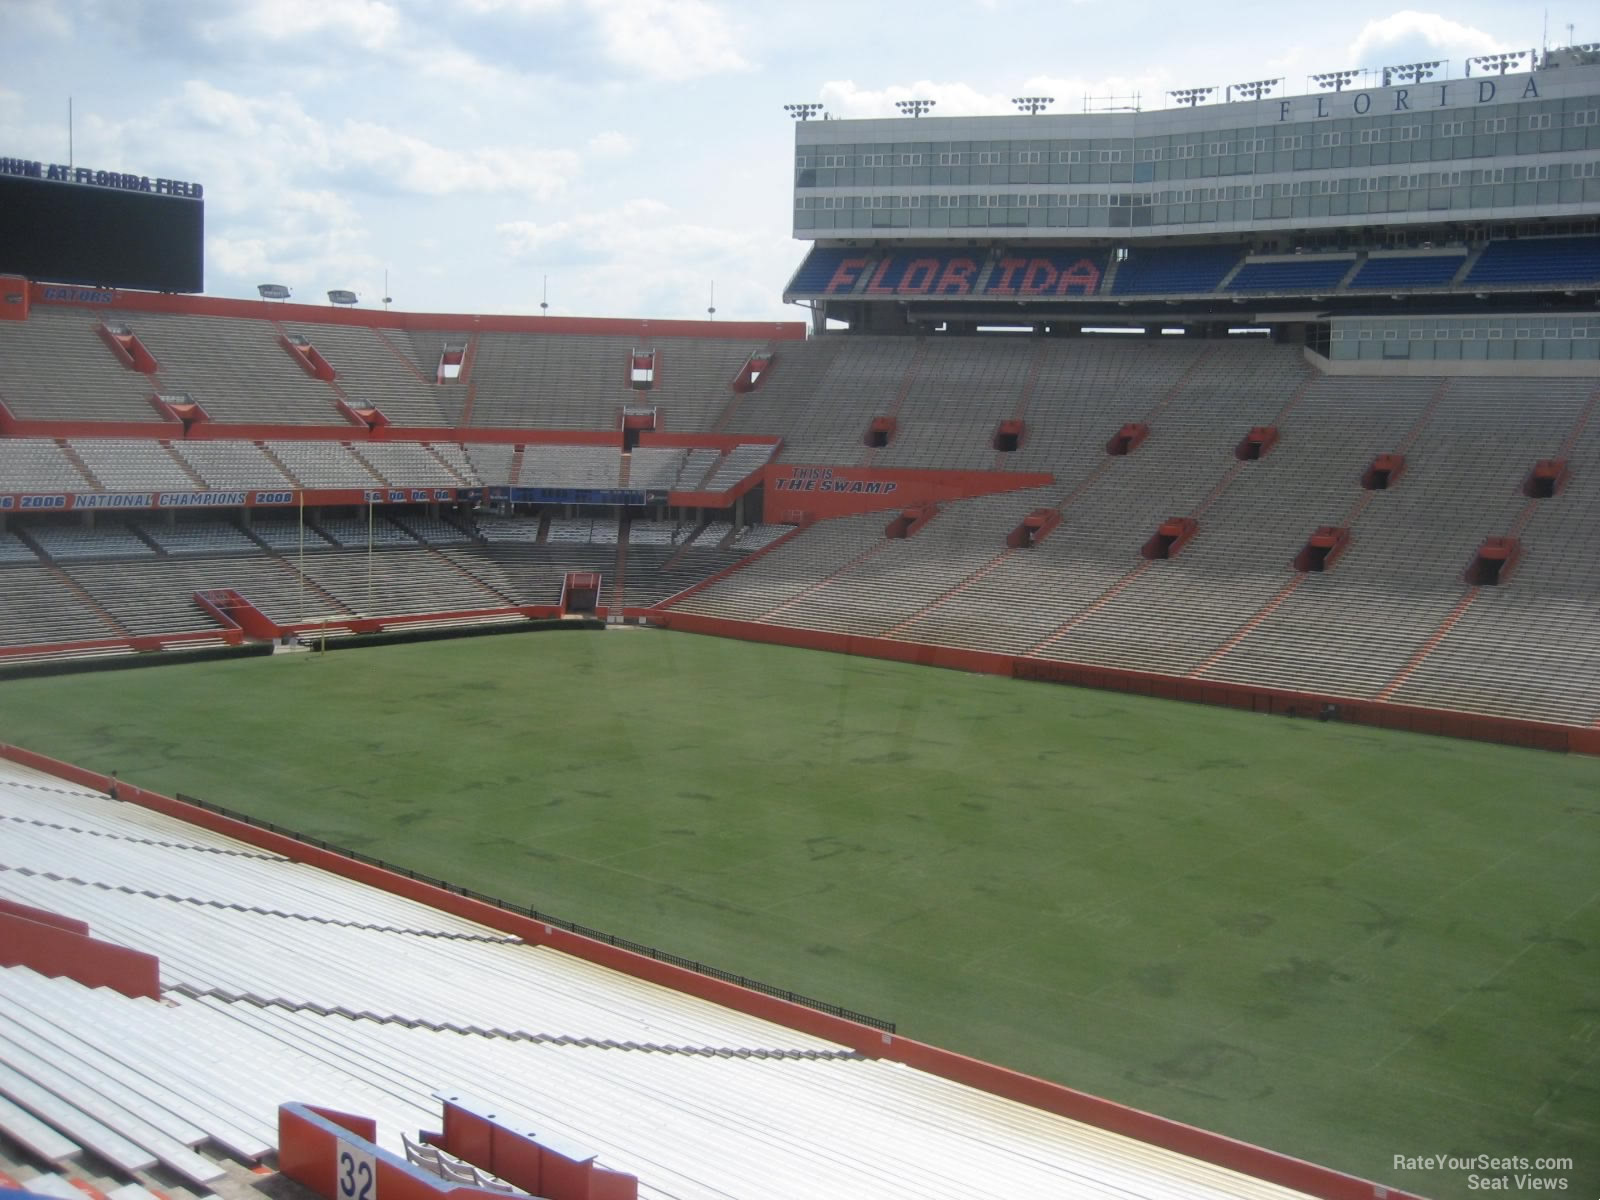 section 29, row 58 seat view  - ben hill griffin stadium